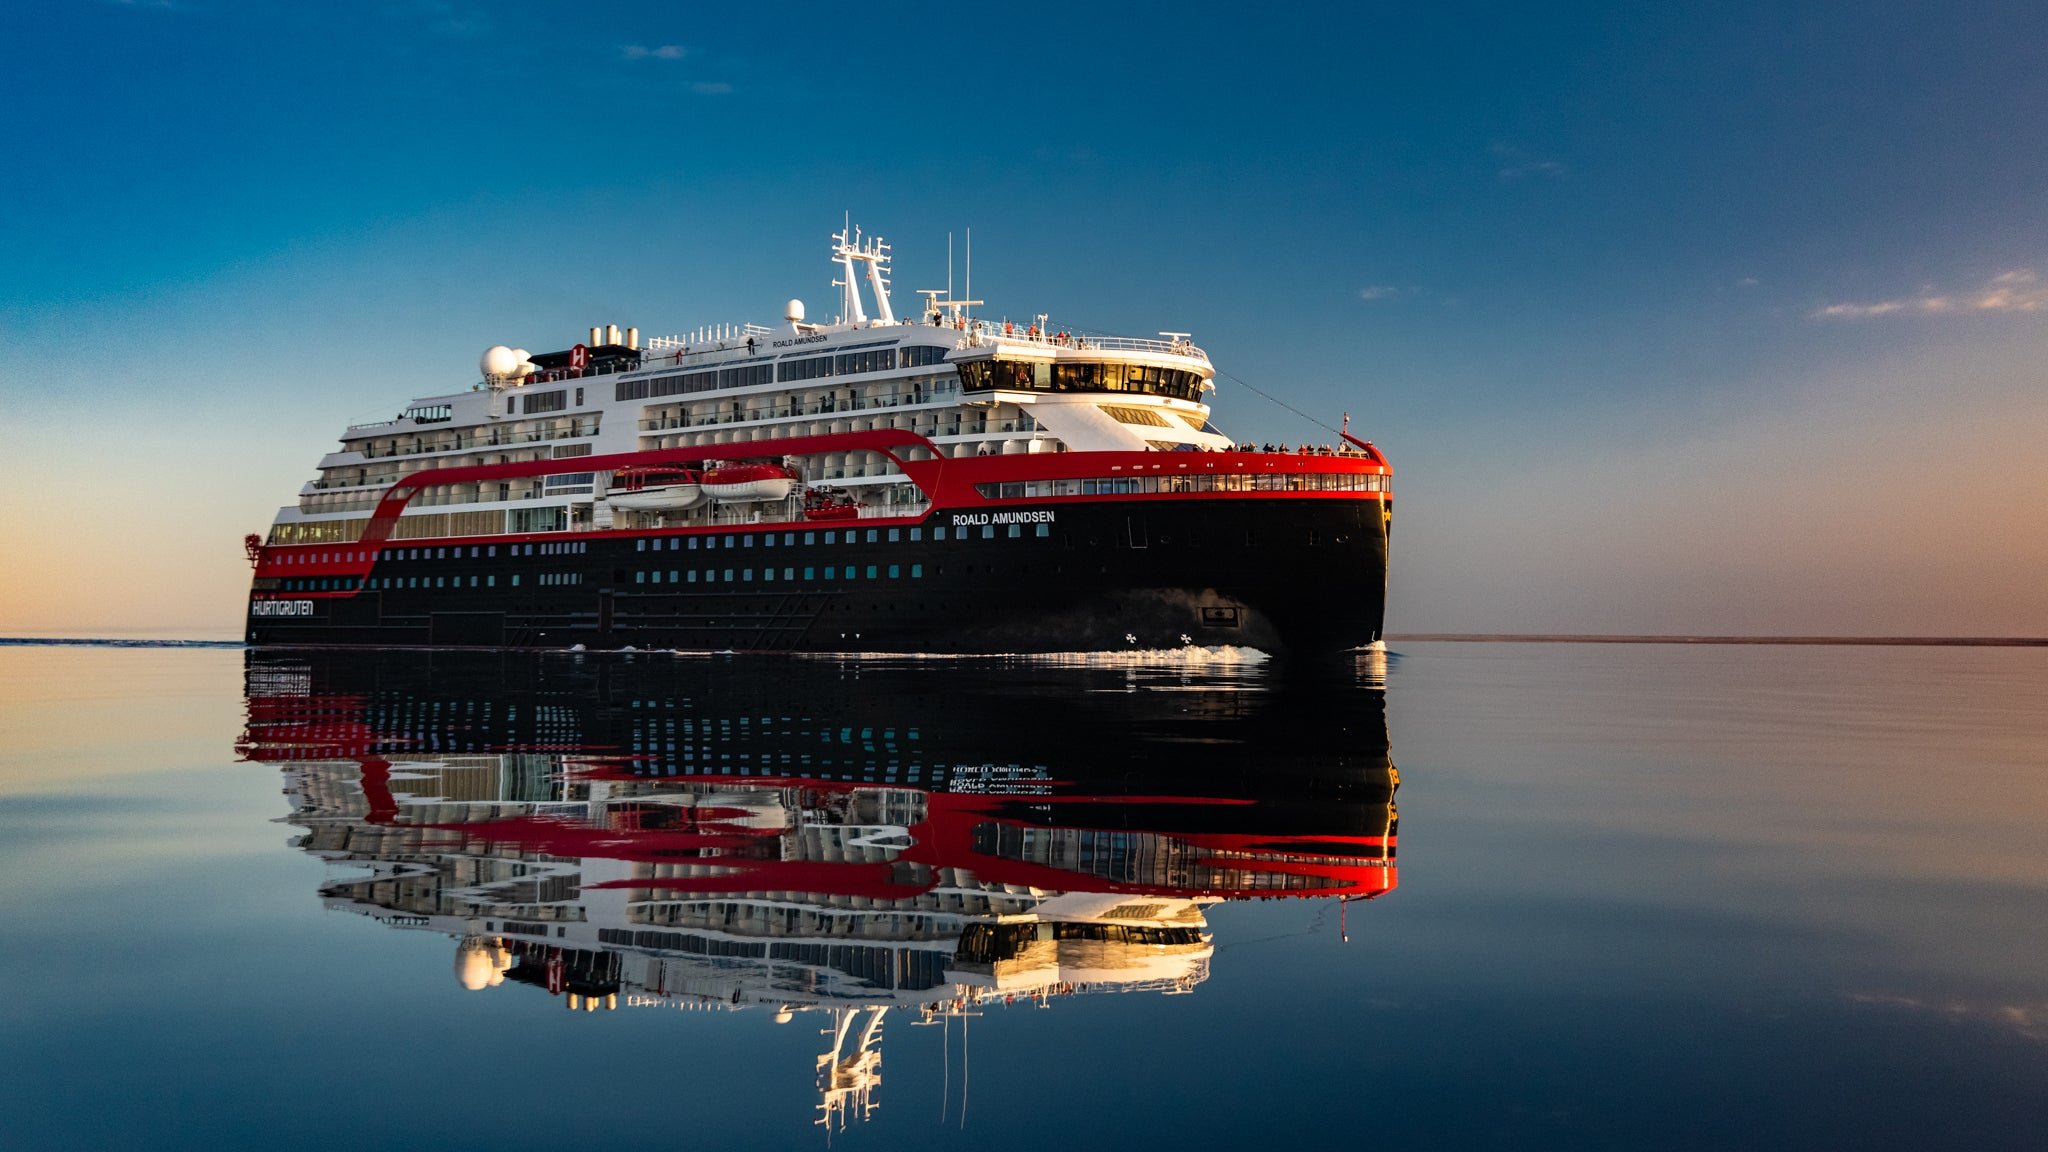 Best Antarctica cruise ships: 11 stylish expedition vessels exploring the White Continent